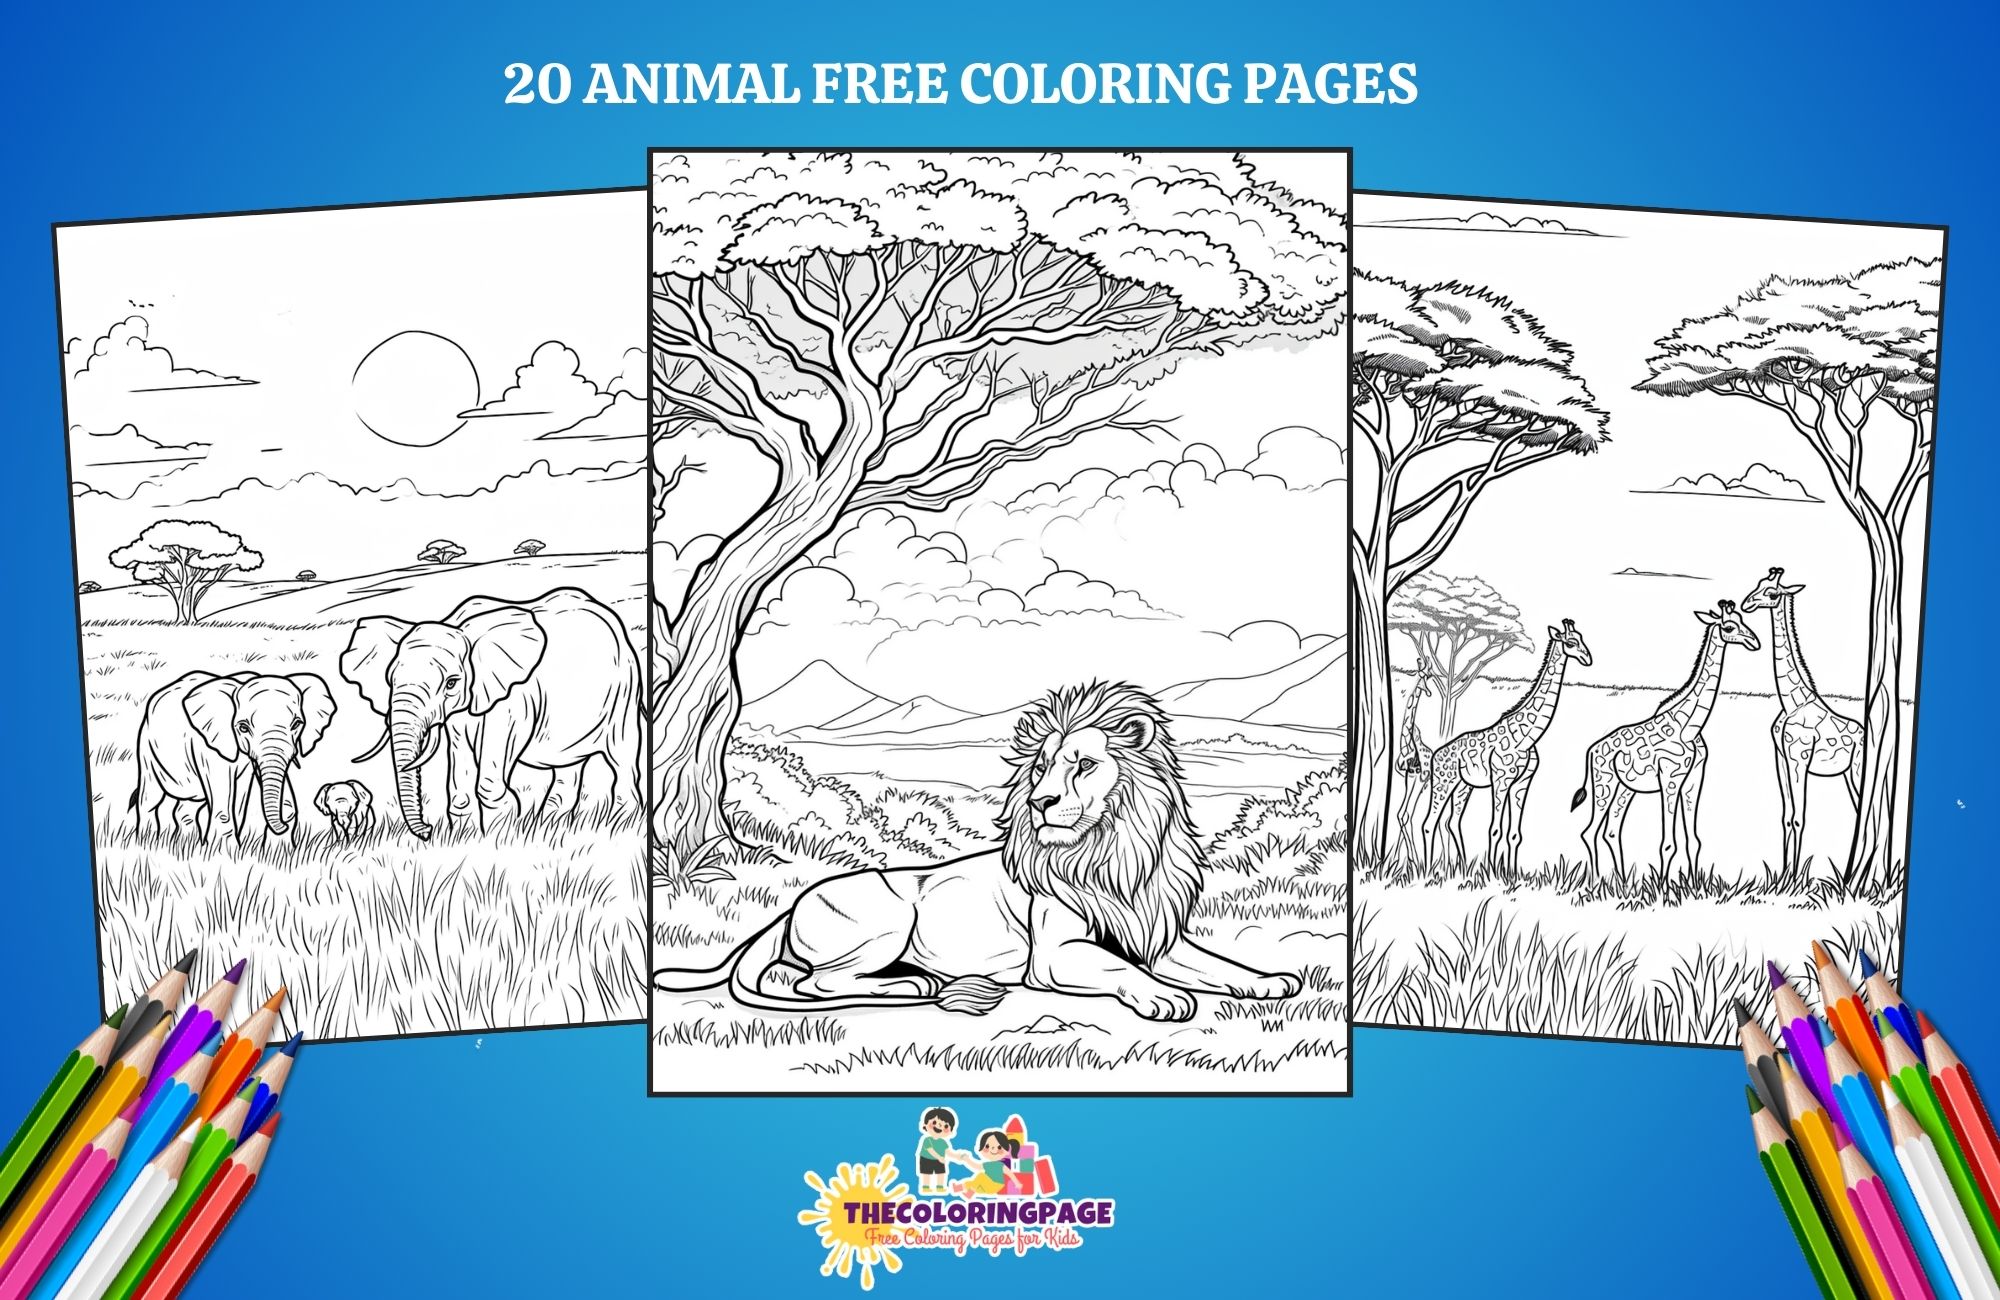 Unlock Creativity with 20 Animal Coloring Pages Free for Kids of All Ages